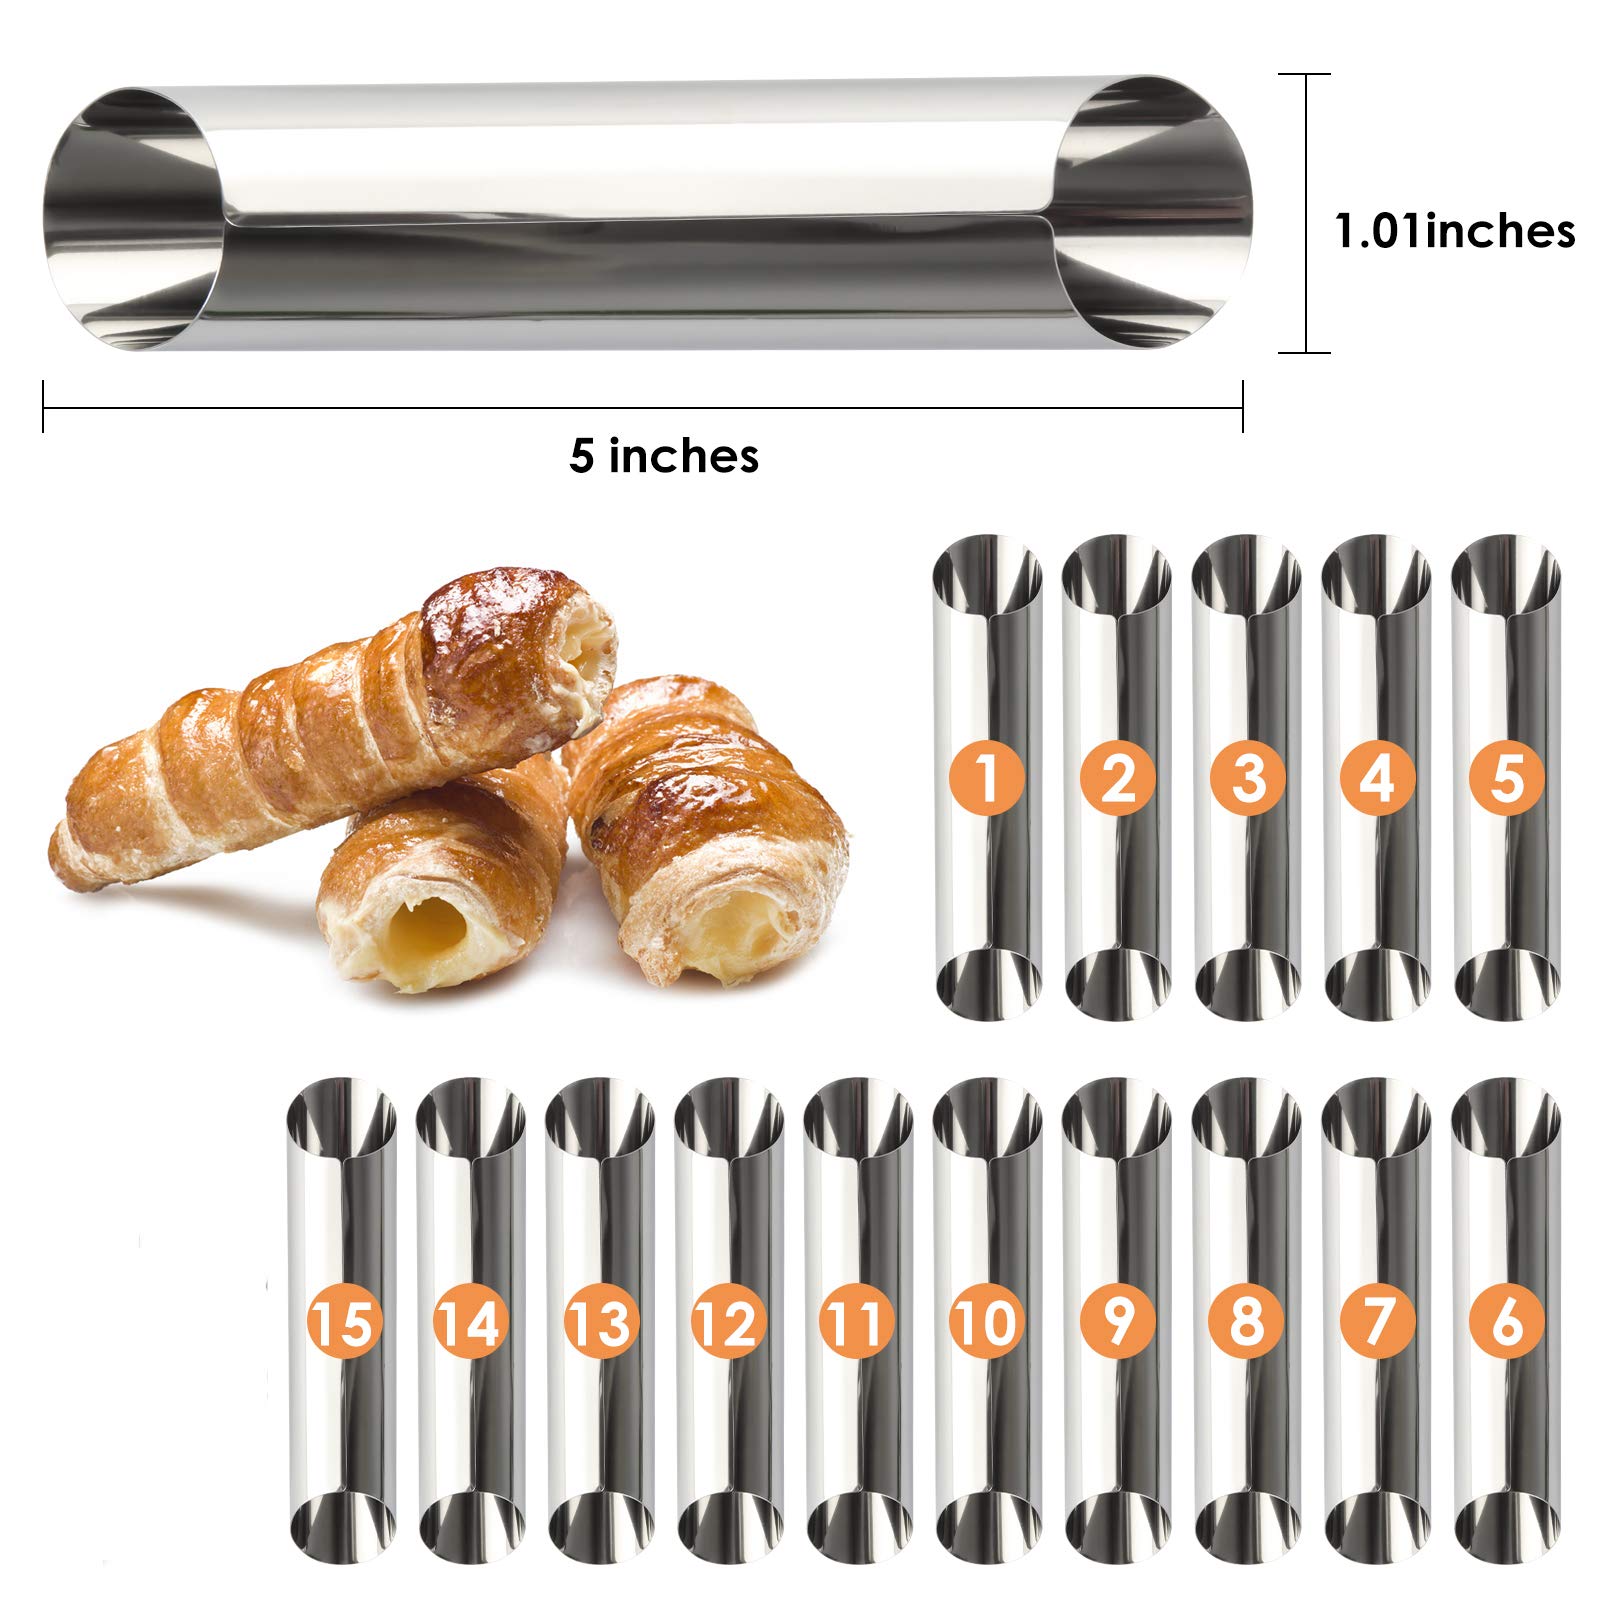 Cannoli Tubes,5 inch Large Stainless Steel Cannoli Forms Non-stick cream horn Danish Pastry Molds for Croissant Shell Cream Roll Pack of 15